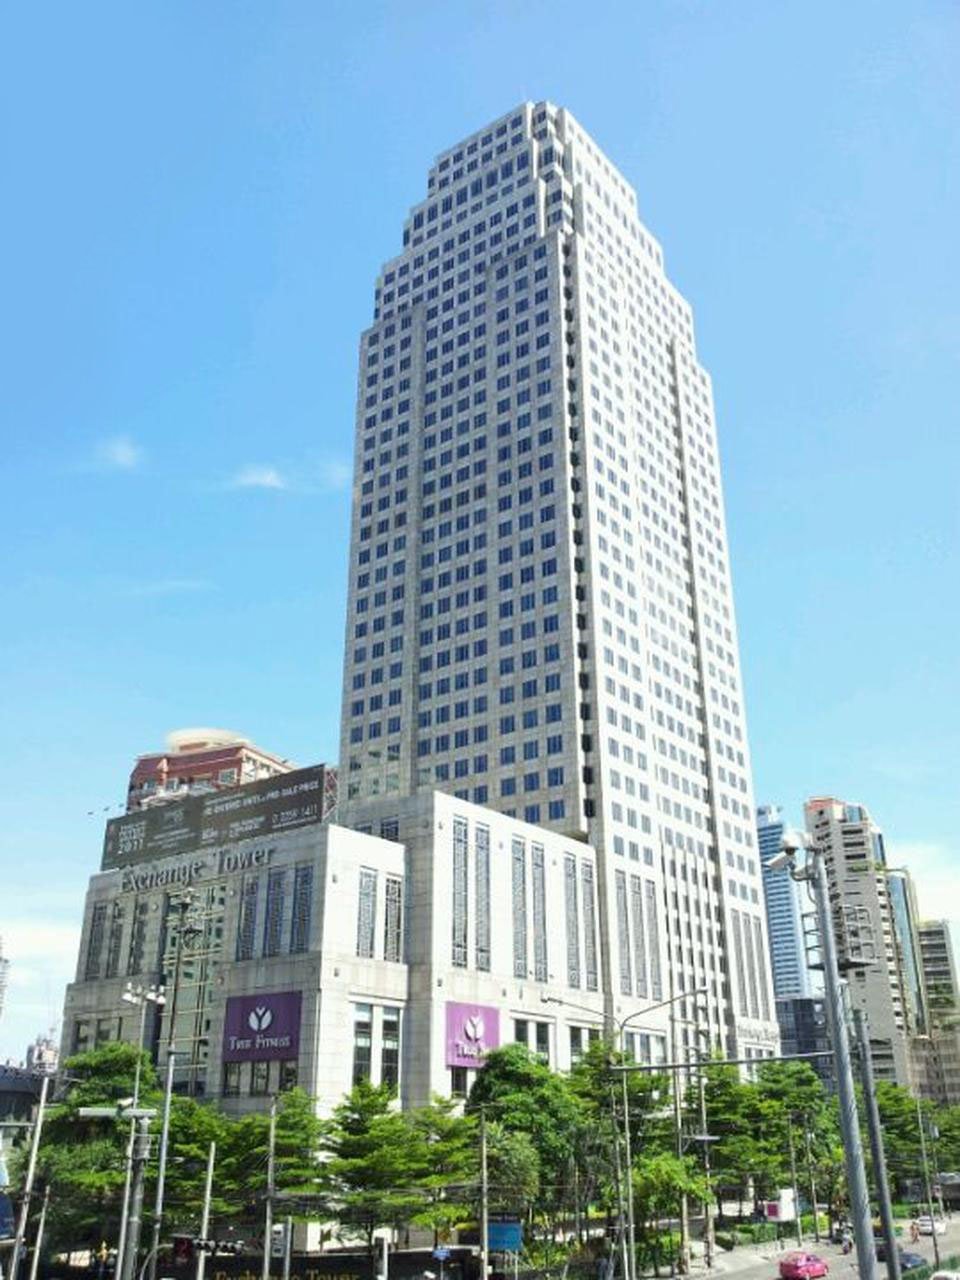 EXCHANGE TOWER